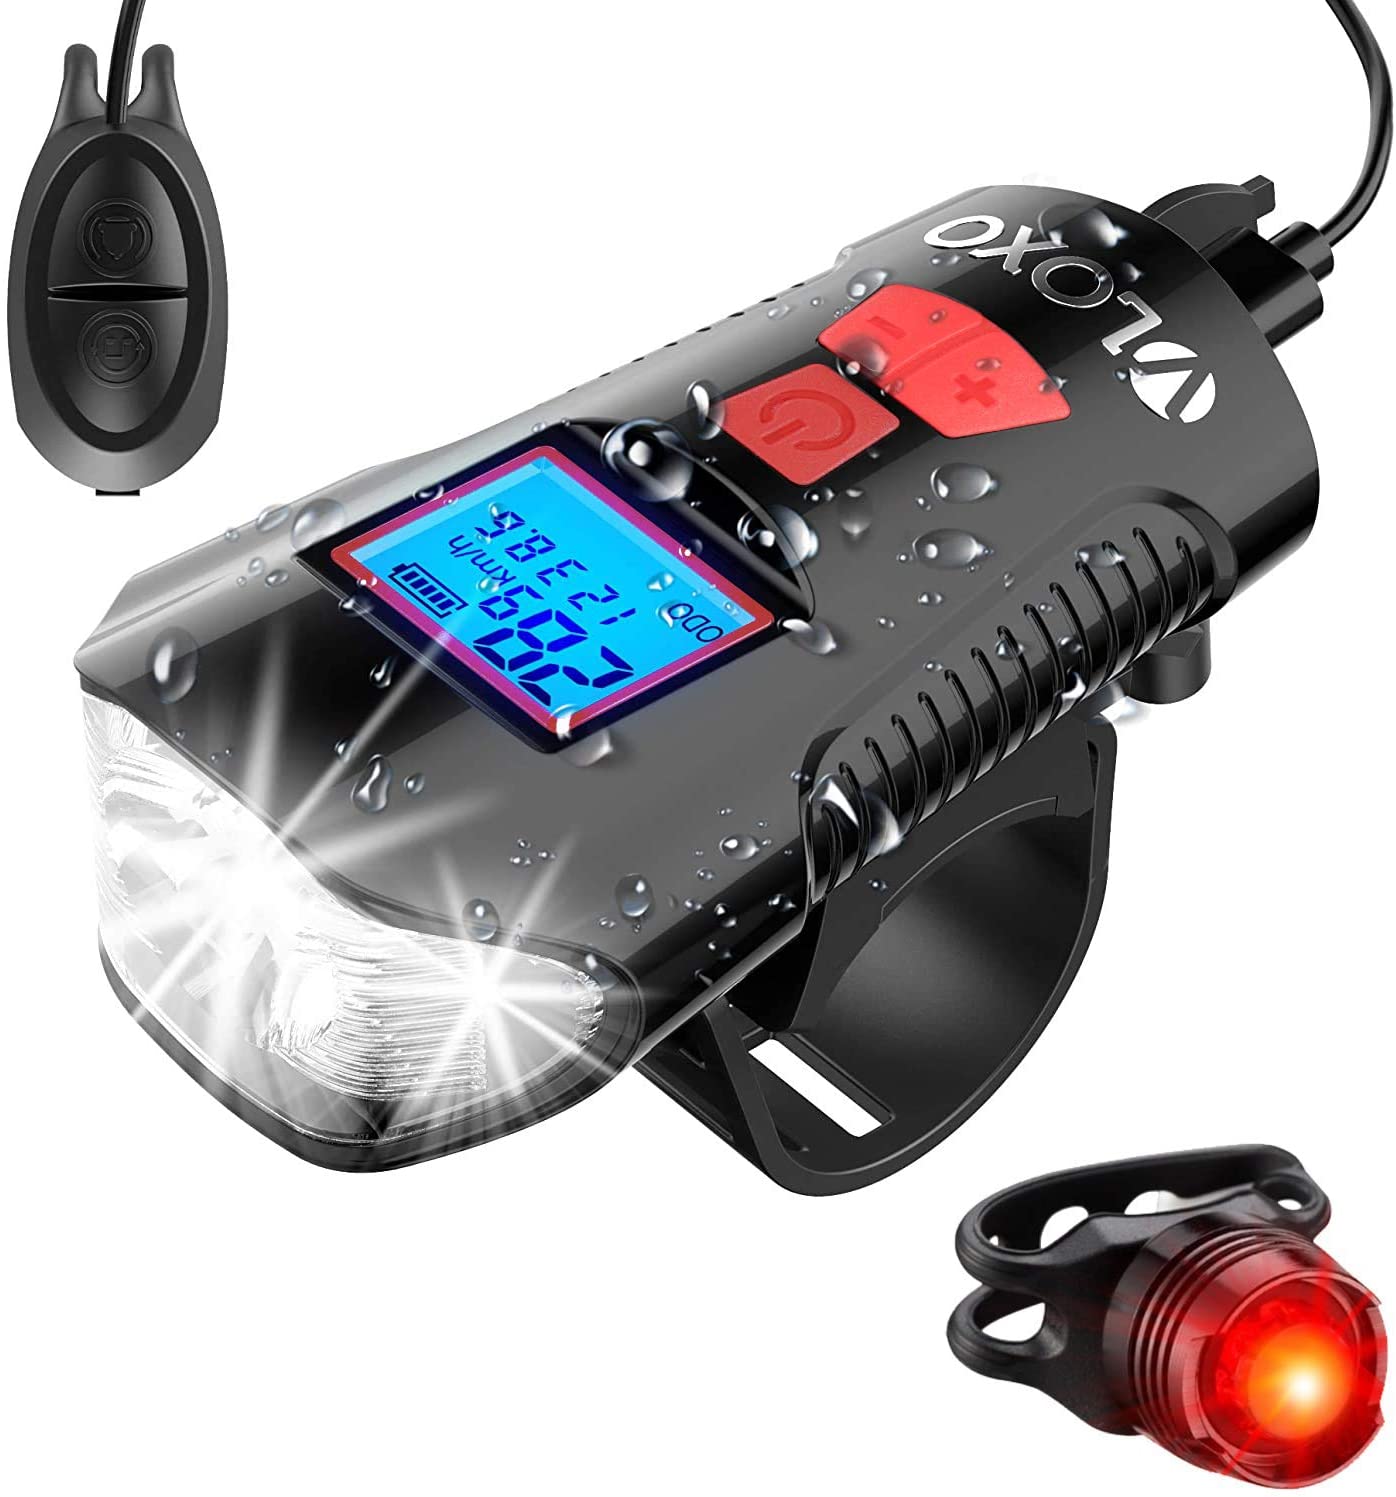 VLOXO Bike Speedometer with LED Bike Front Light & Tail Light IPX7 Waterproof USB Rechargeable